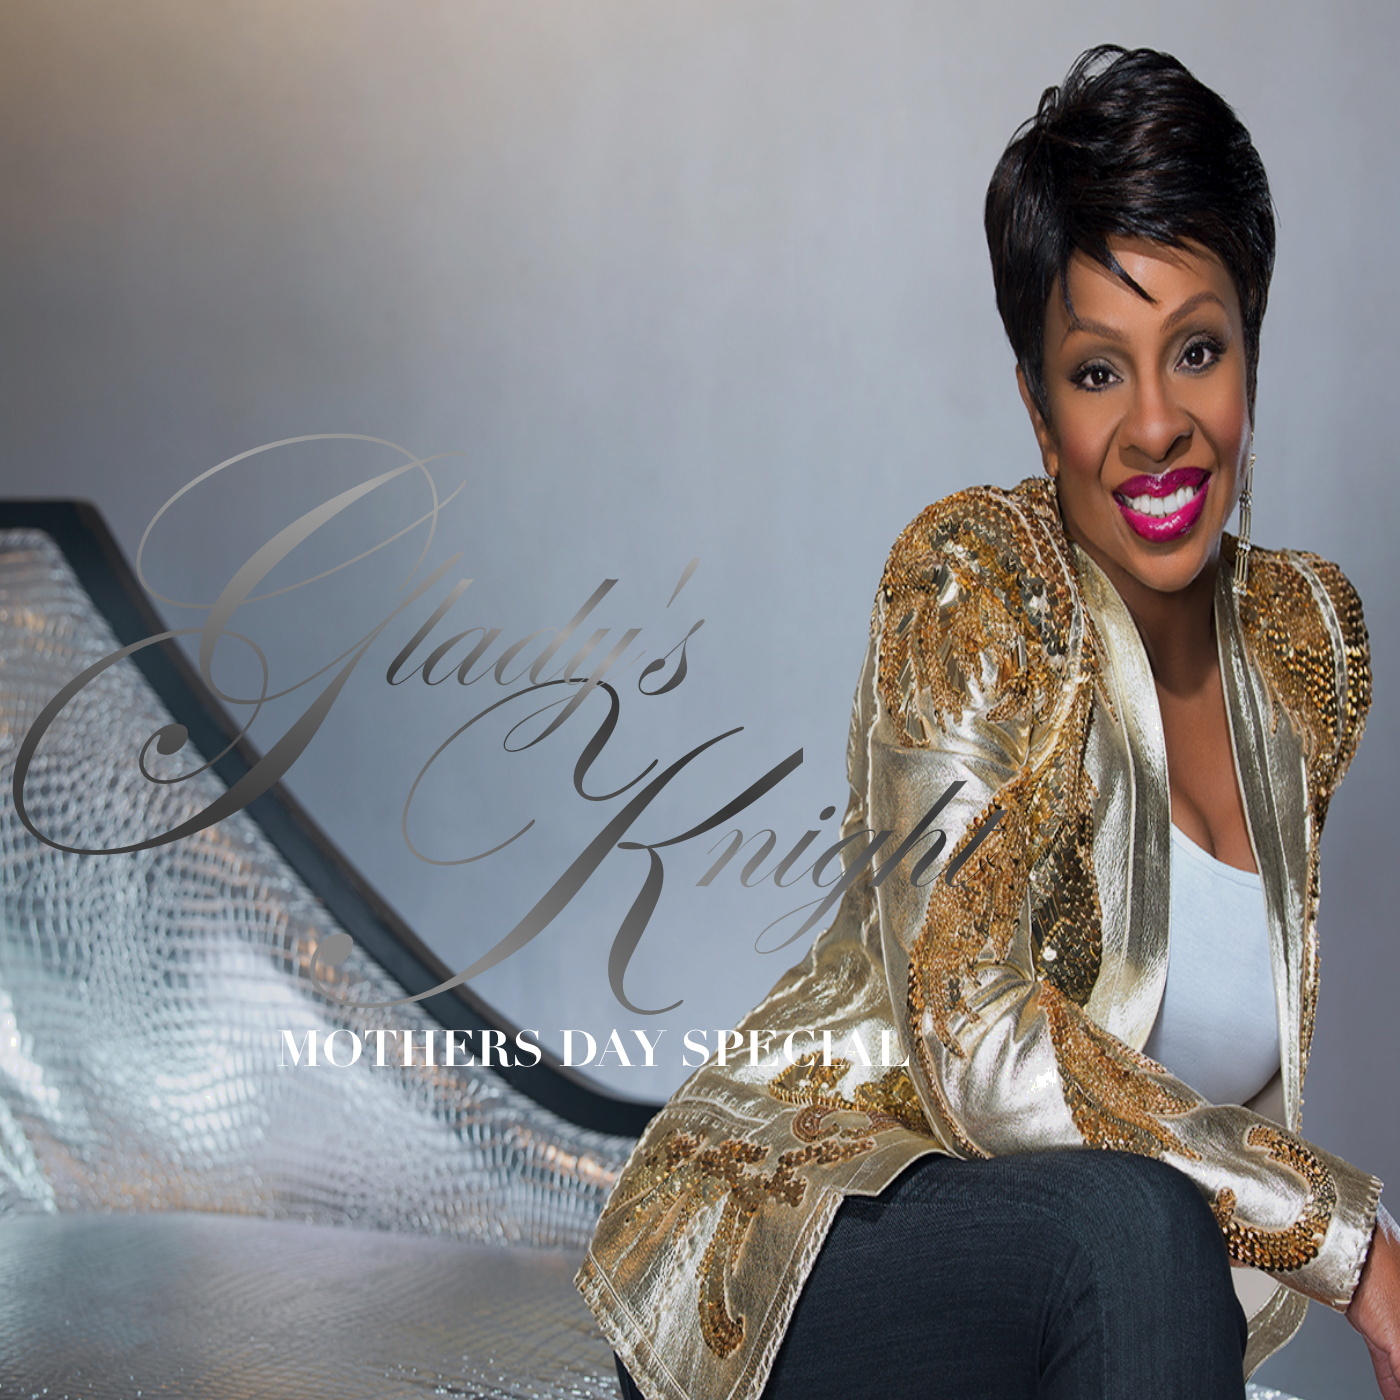 Gladys Knight Mothers Day Special